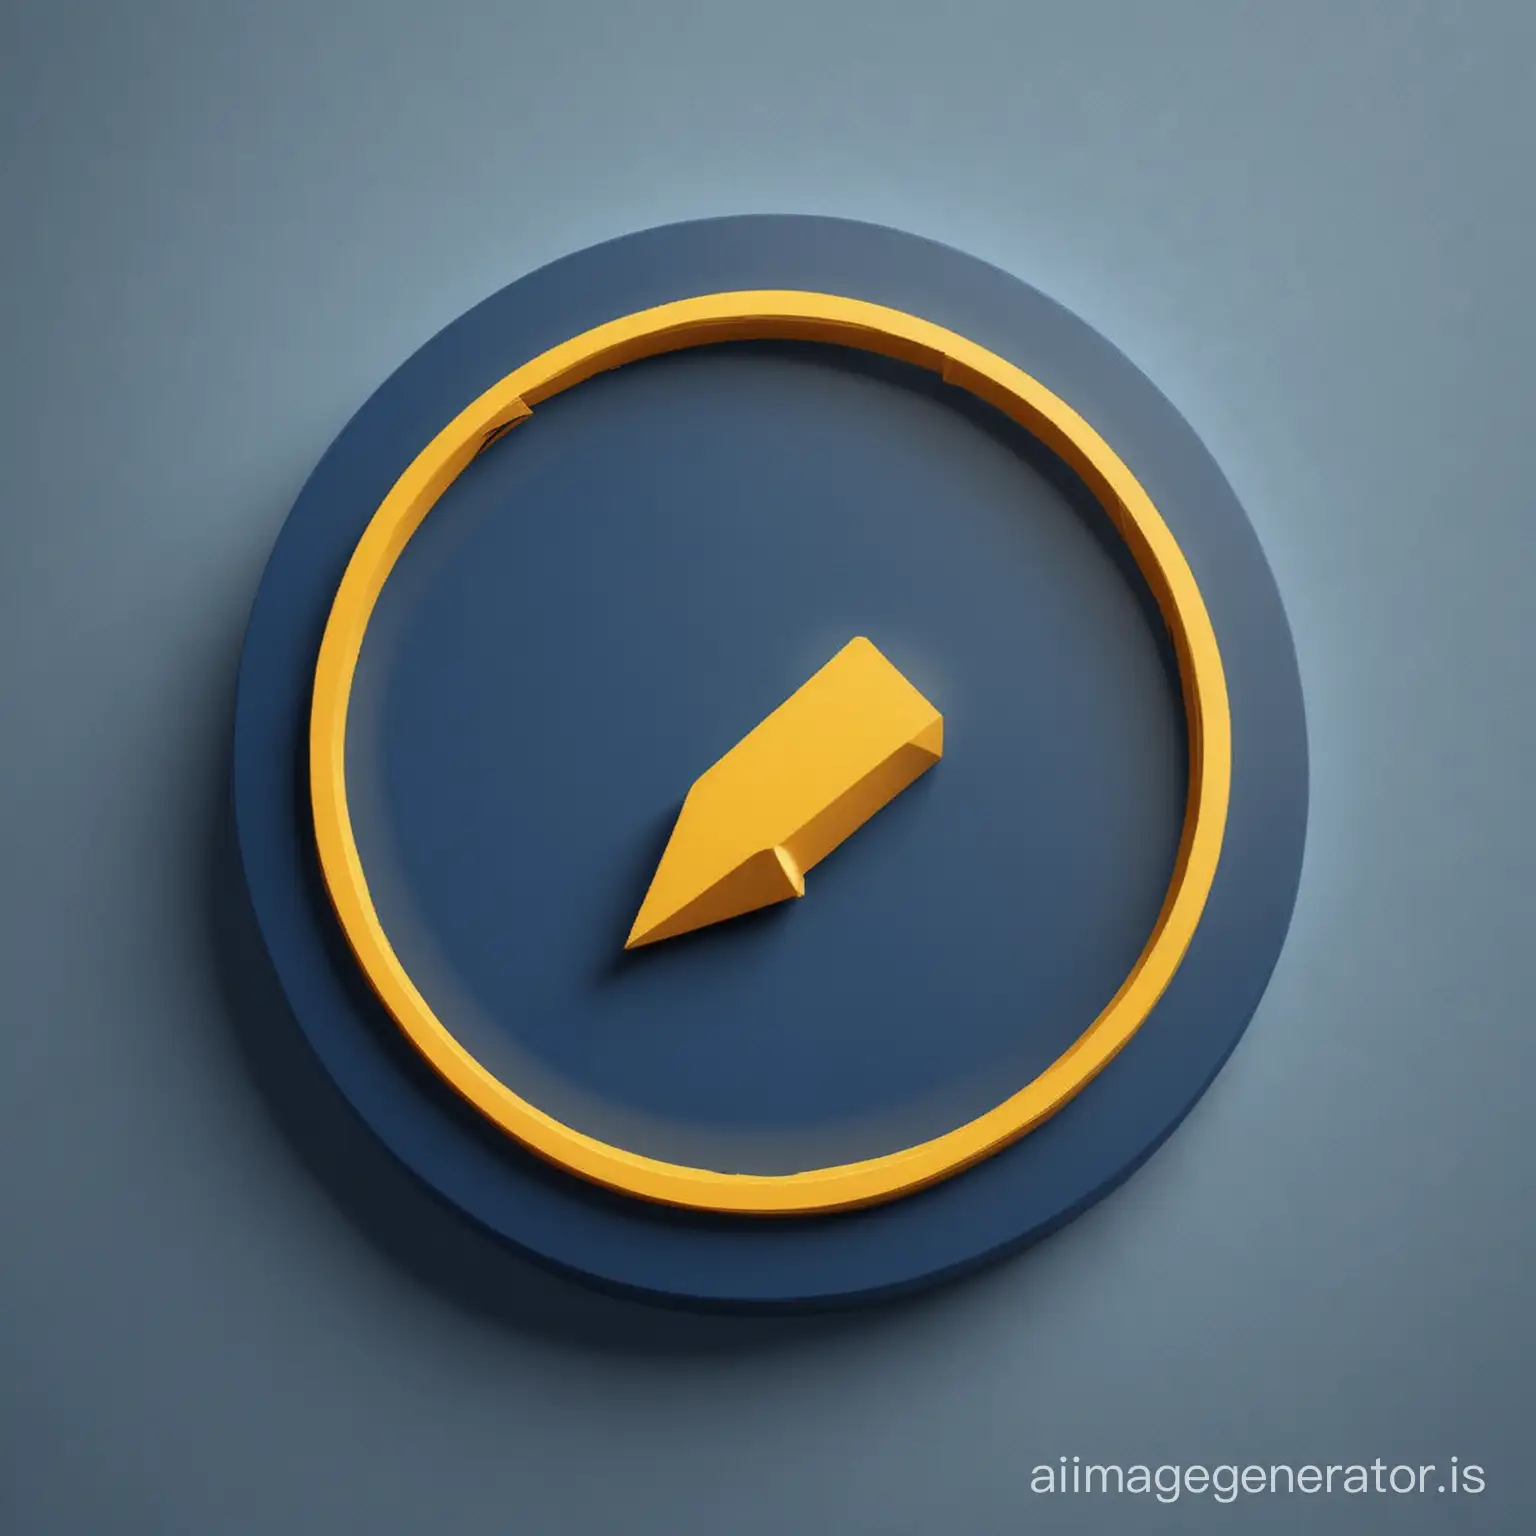 CREATE A 3D IMAGE OF A DARK BLUE AND SHAPED ICON OF YELLOW COLOR ESCLAMATION POINT WITHIN A BLUE  COLOR CIRCLE IN THE CENTER WITH BRNANCO BACKGROUND